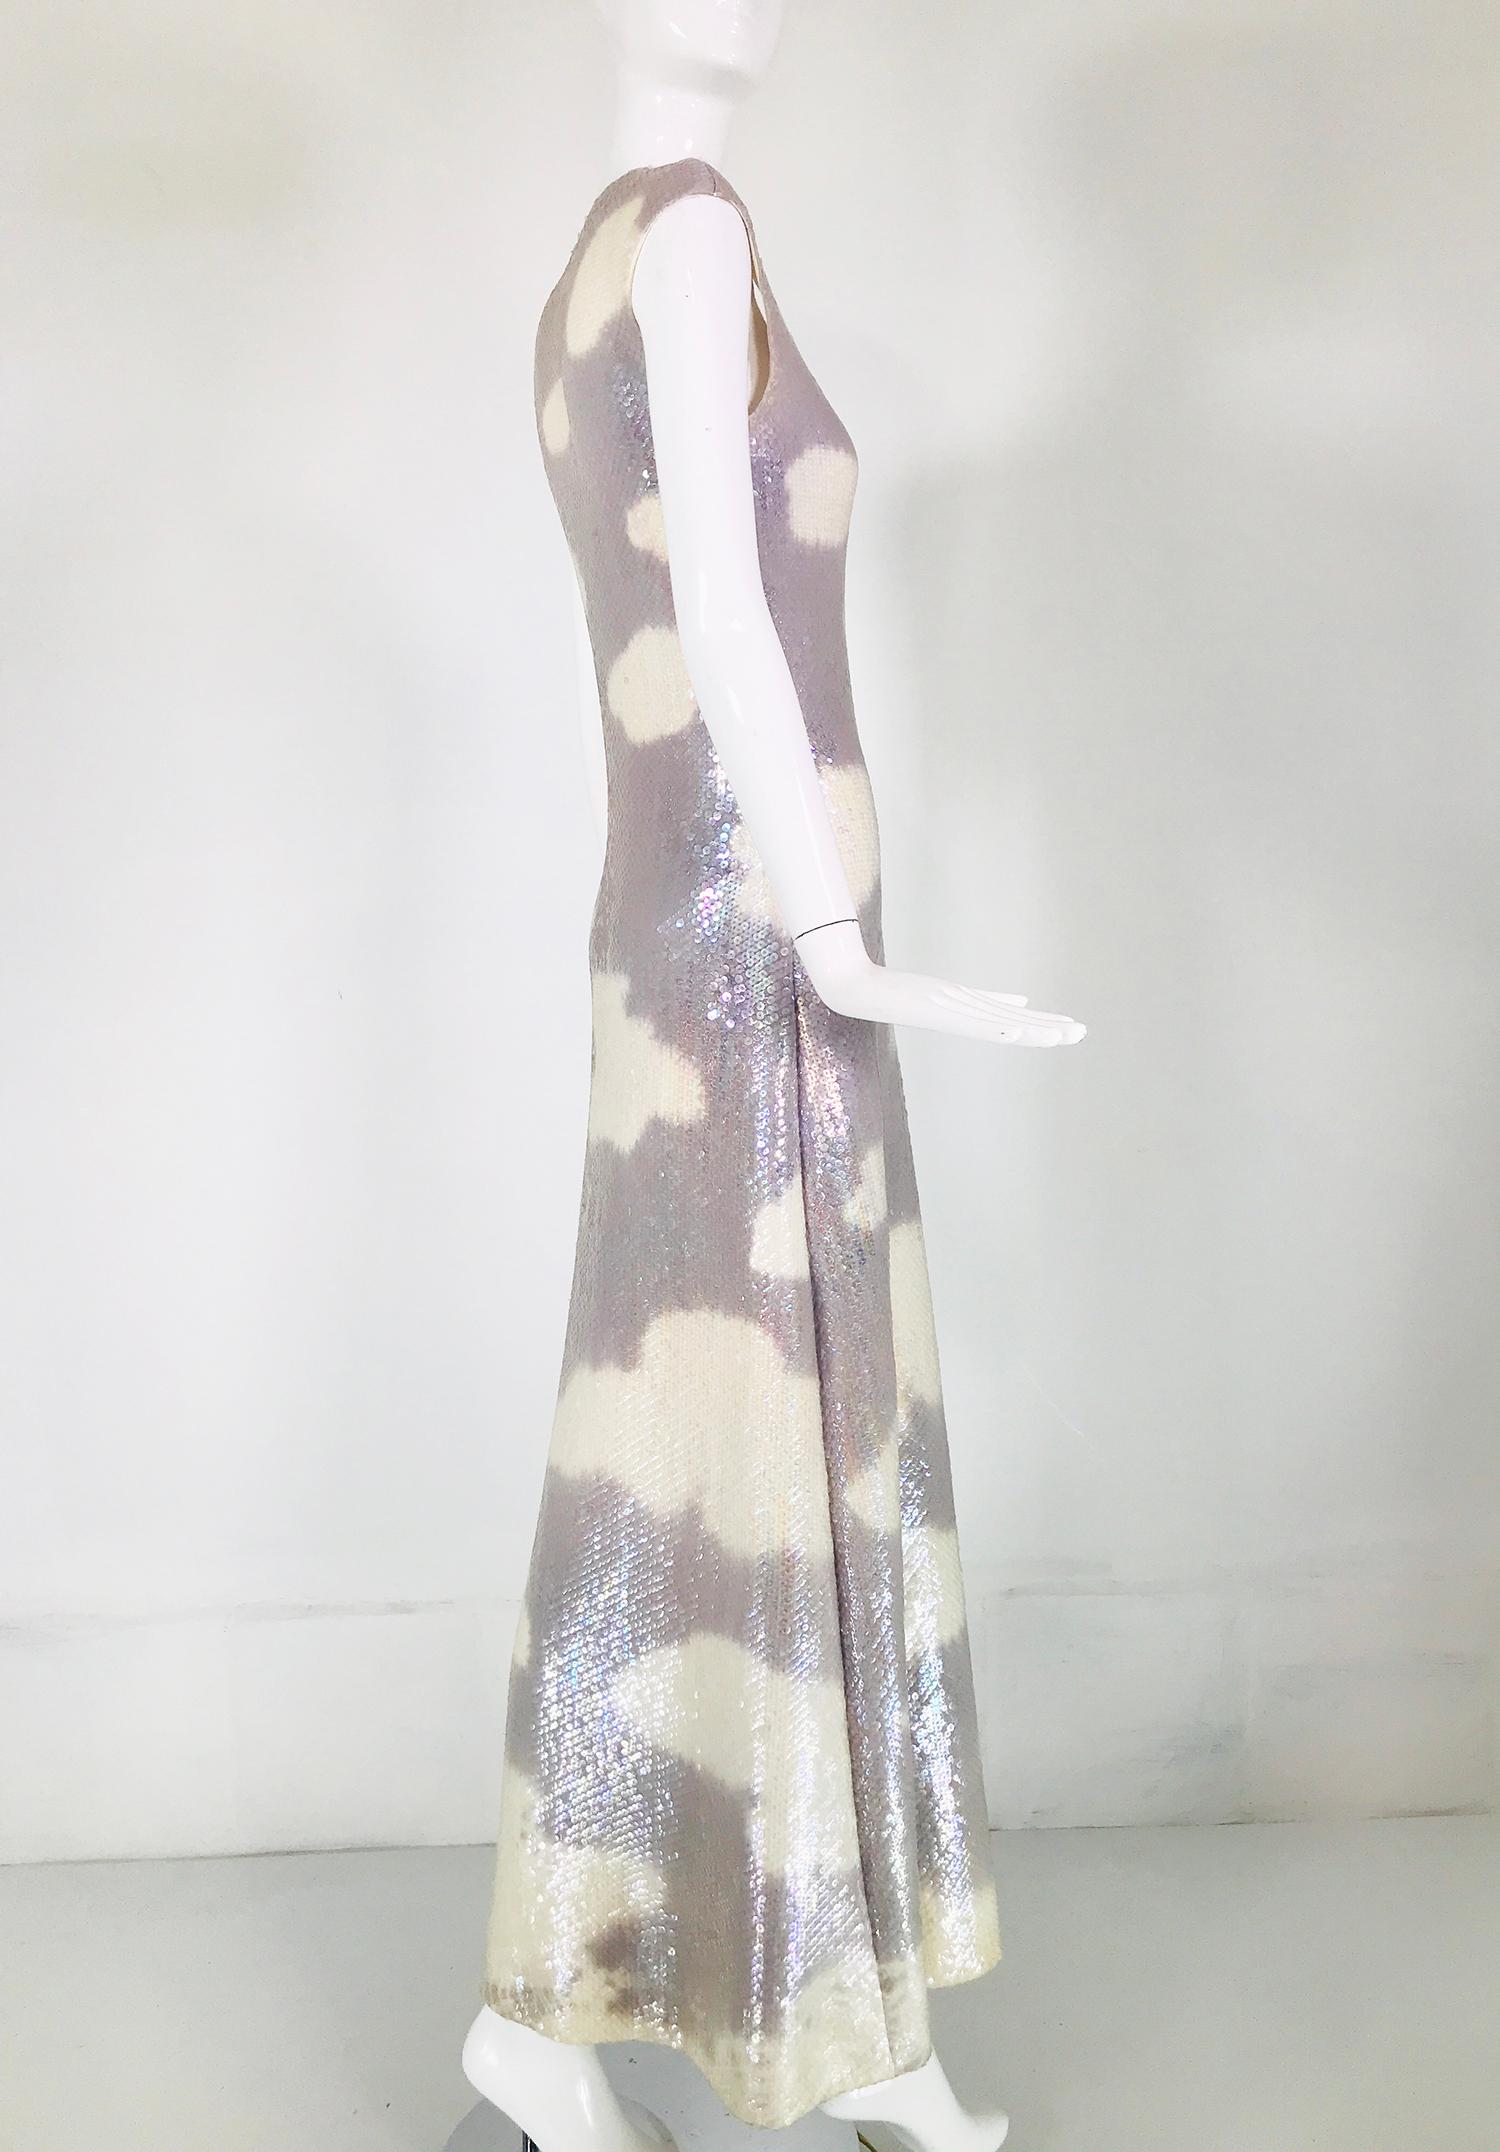 Women's Halston Iconic Clouds Dress in Stormy Grey & Cream Iridescent Sequins Mid 1970s